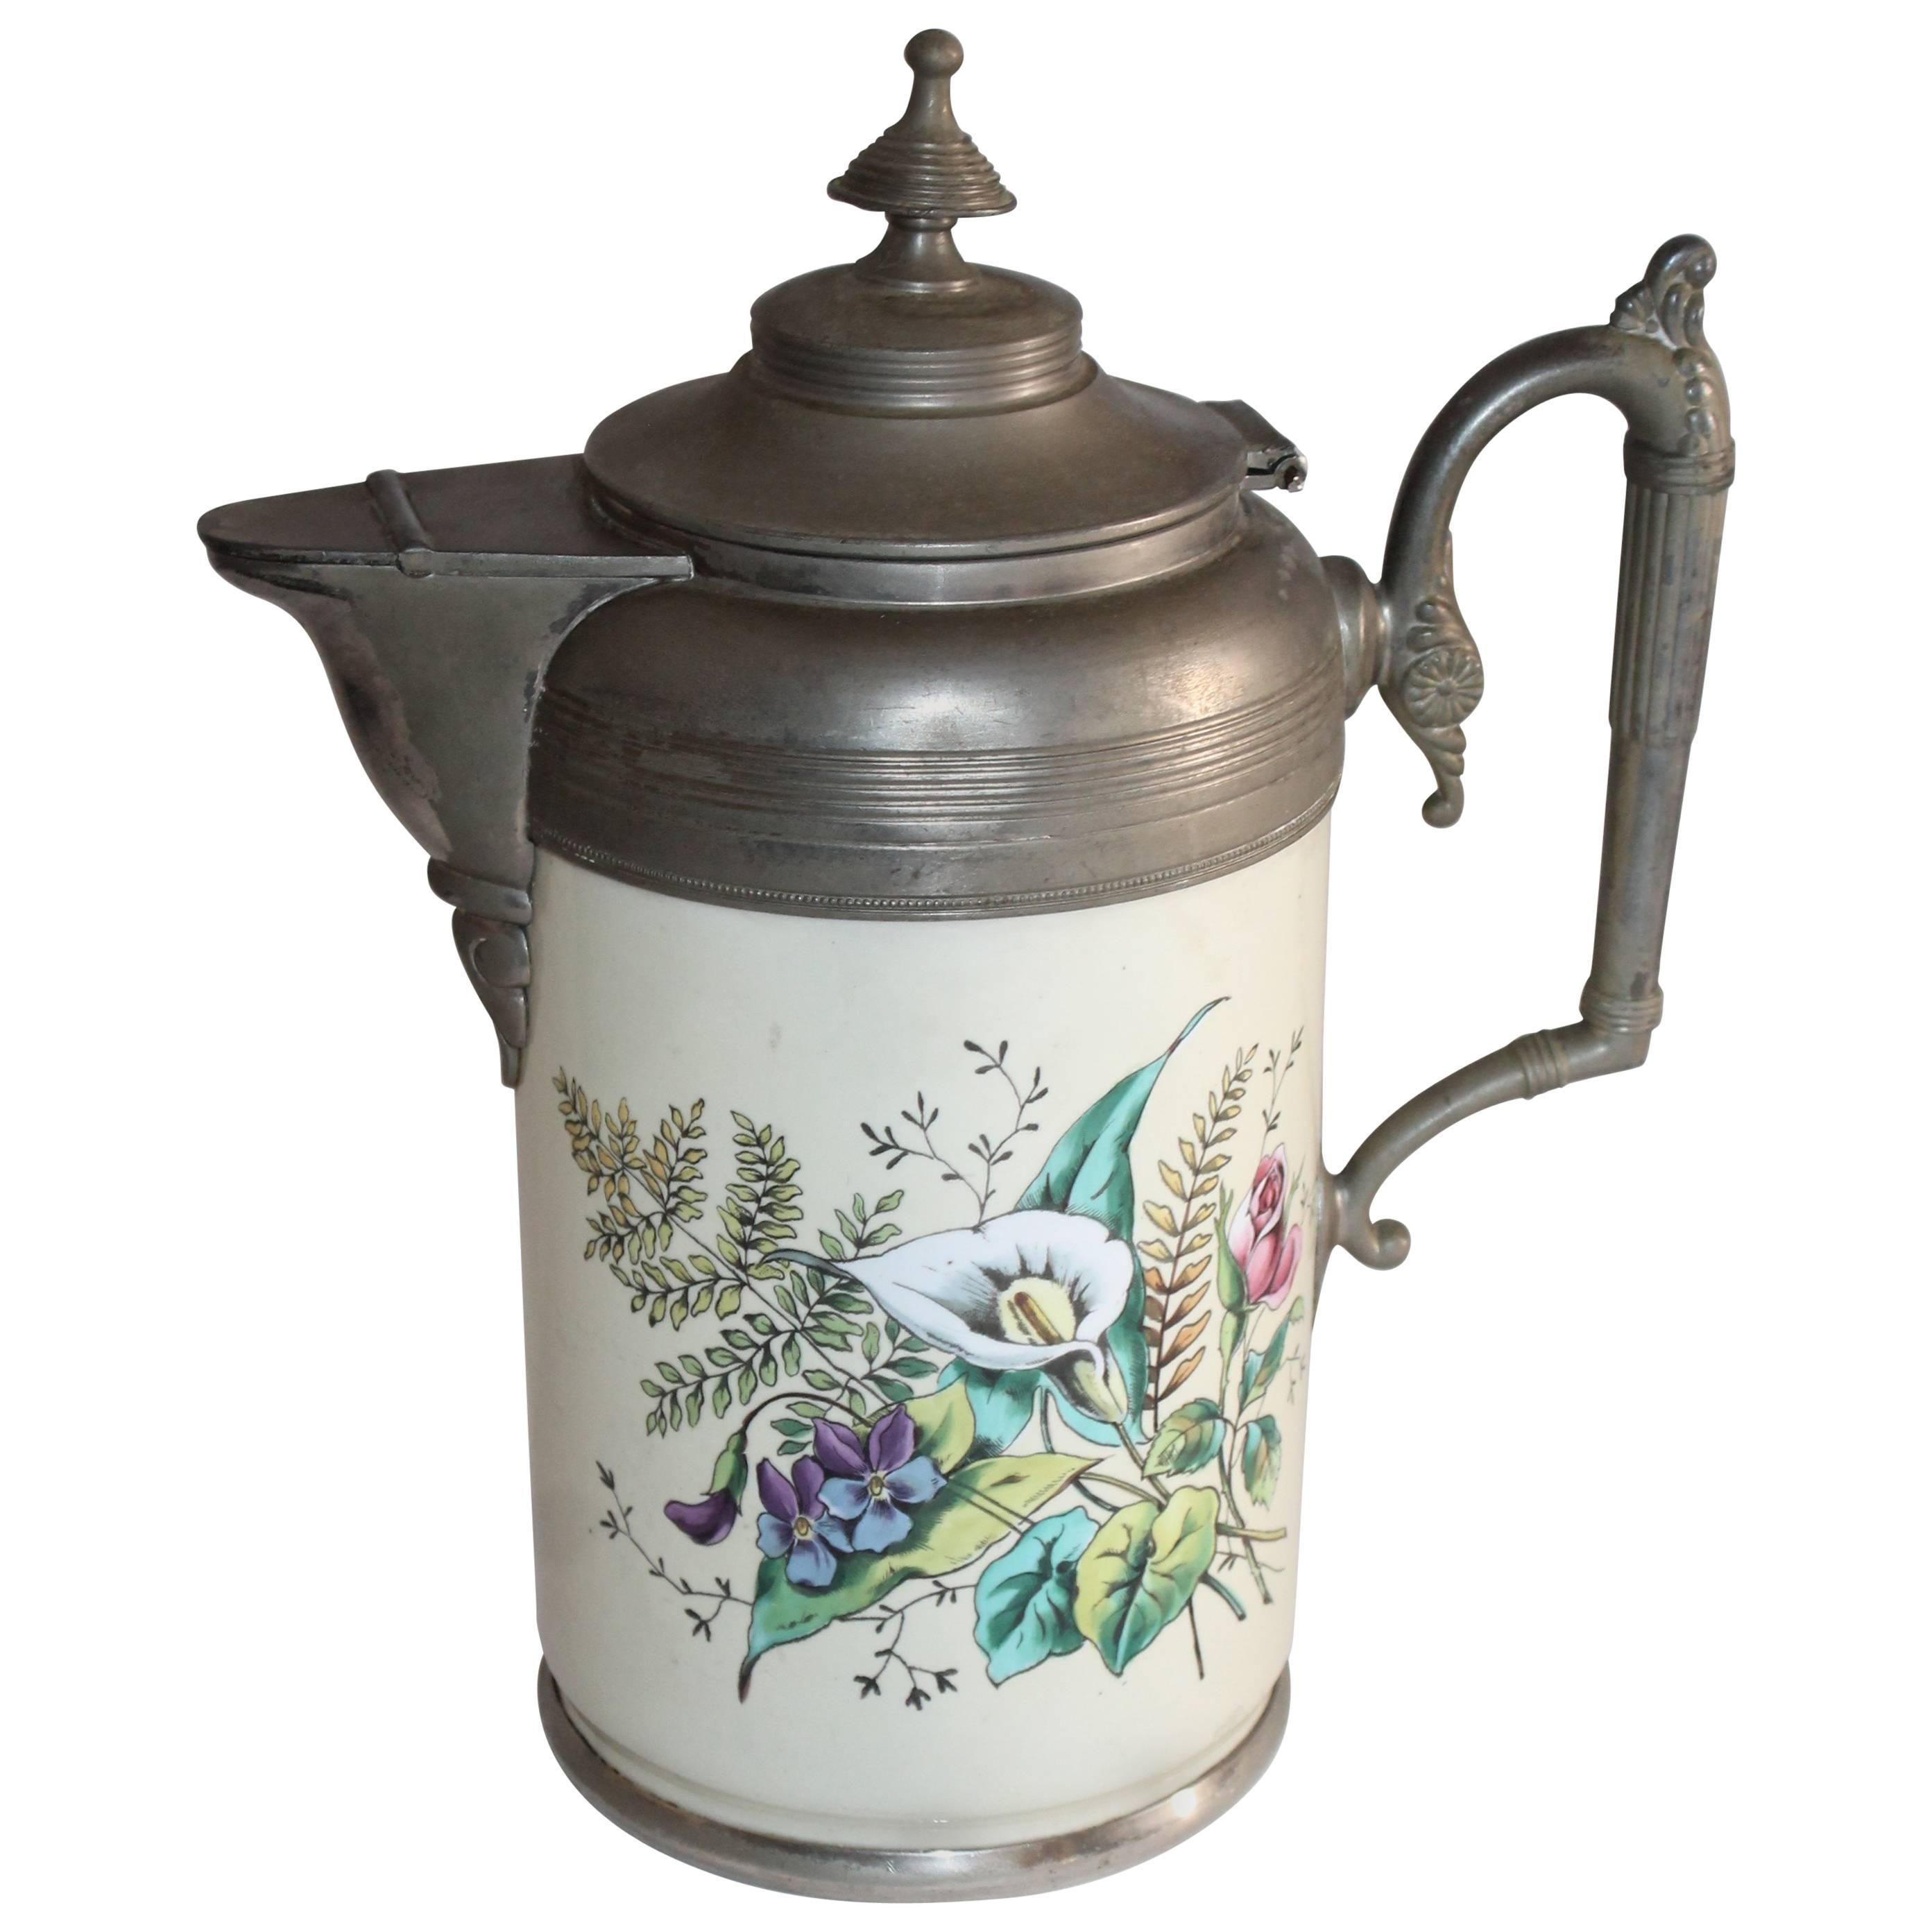 Rare Early 19th Century Enamel Decorated Pewter Coffee Pot